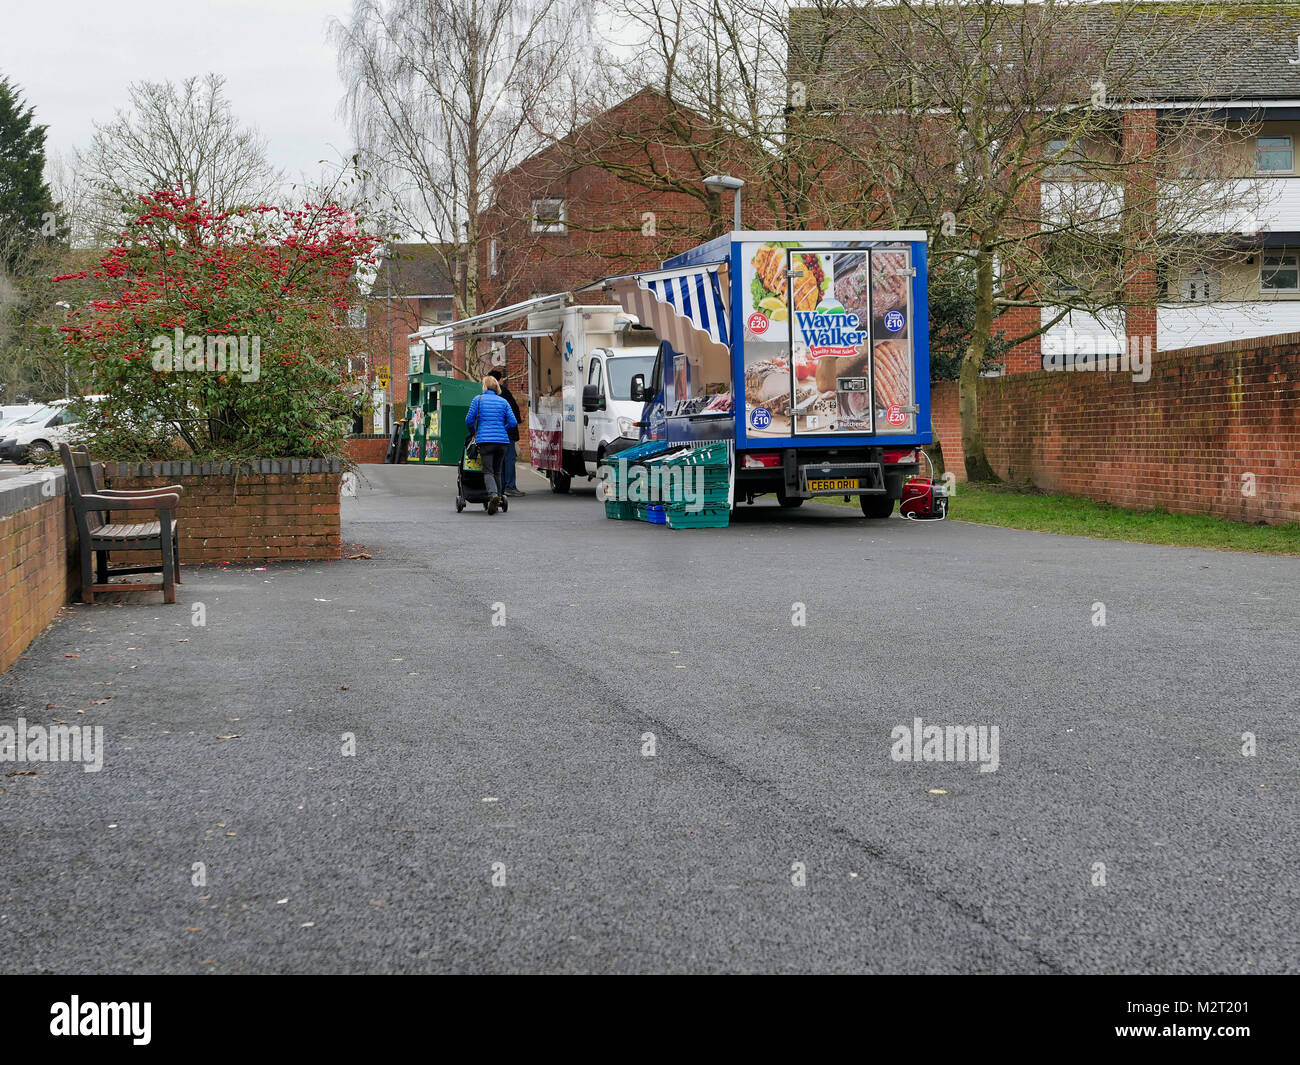 Ashbourne, UK. 8th February, 2018. Only two vendors attend the struggling Ashbourne, Derbyshire Thursday market after the Town Council decide to cut costs by not providing stalls for market traders. Ashbourne is the gateway to the Peak District National Park close to the Dovedale valley. Credit: Doug Blane/Alamy Live News Stock Photo